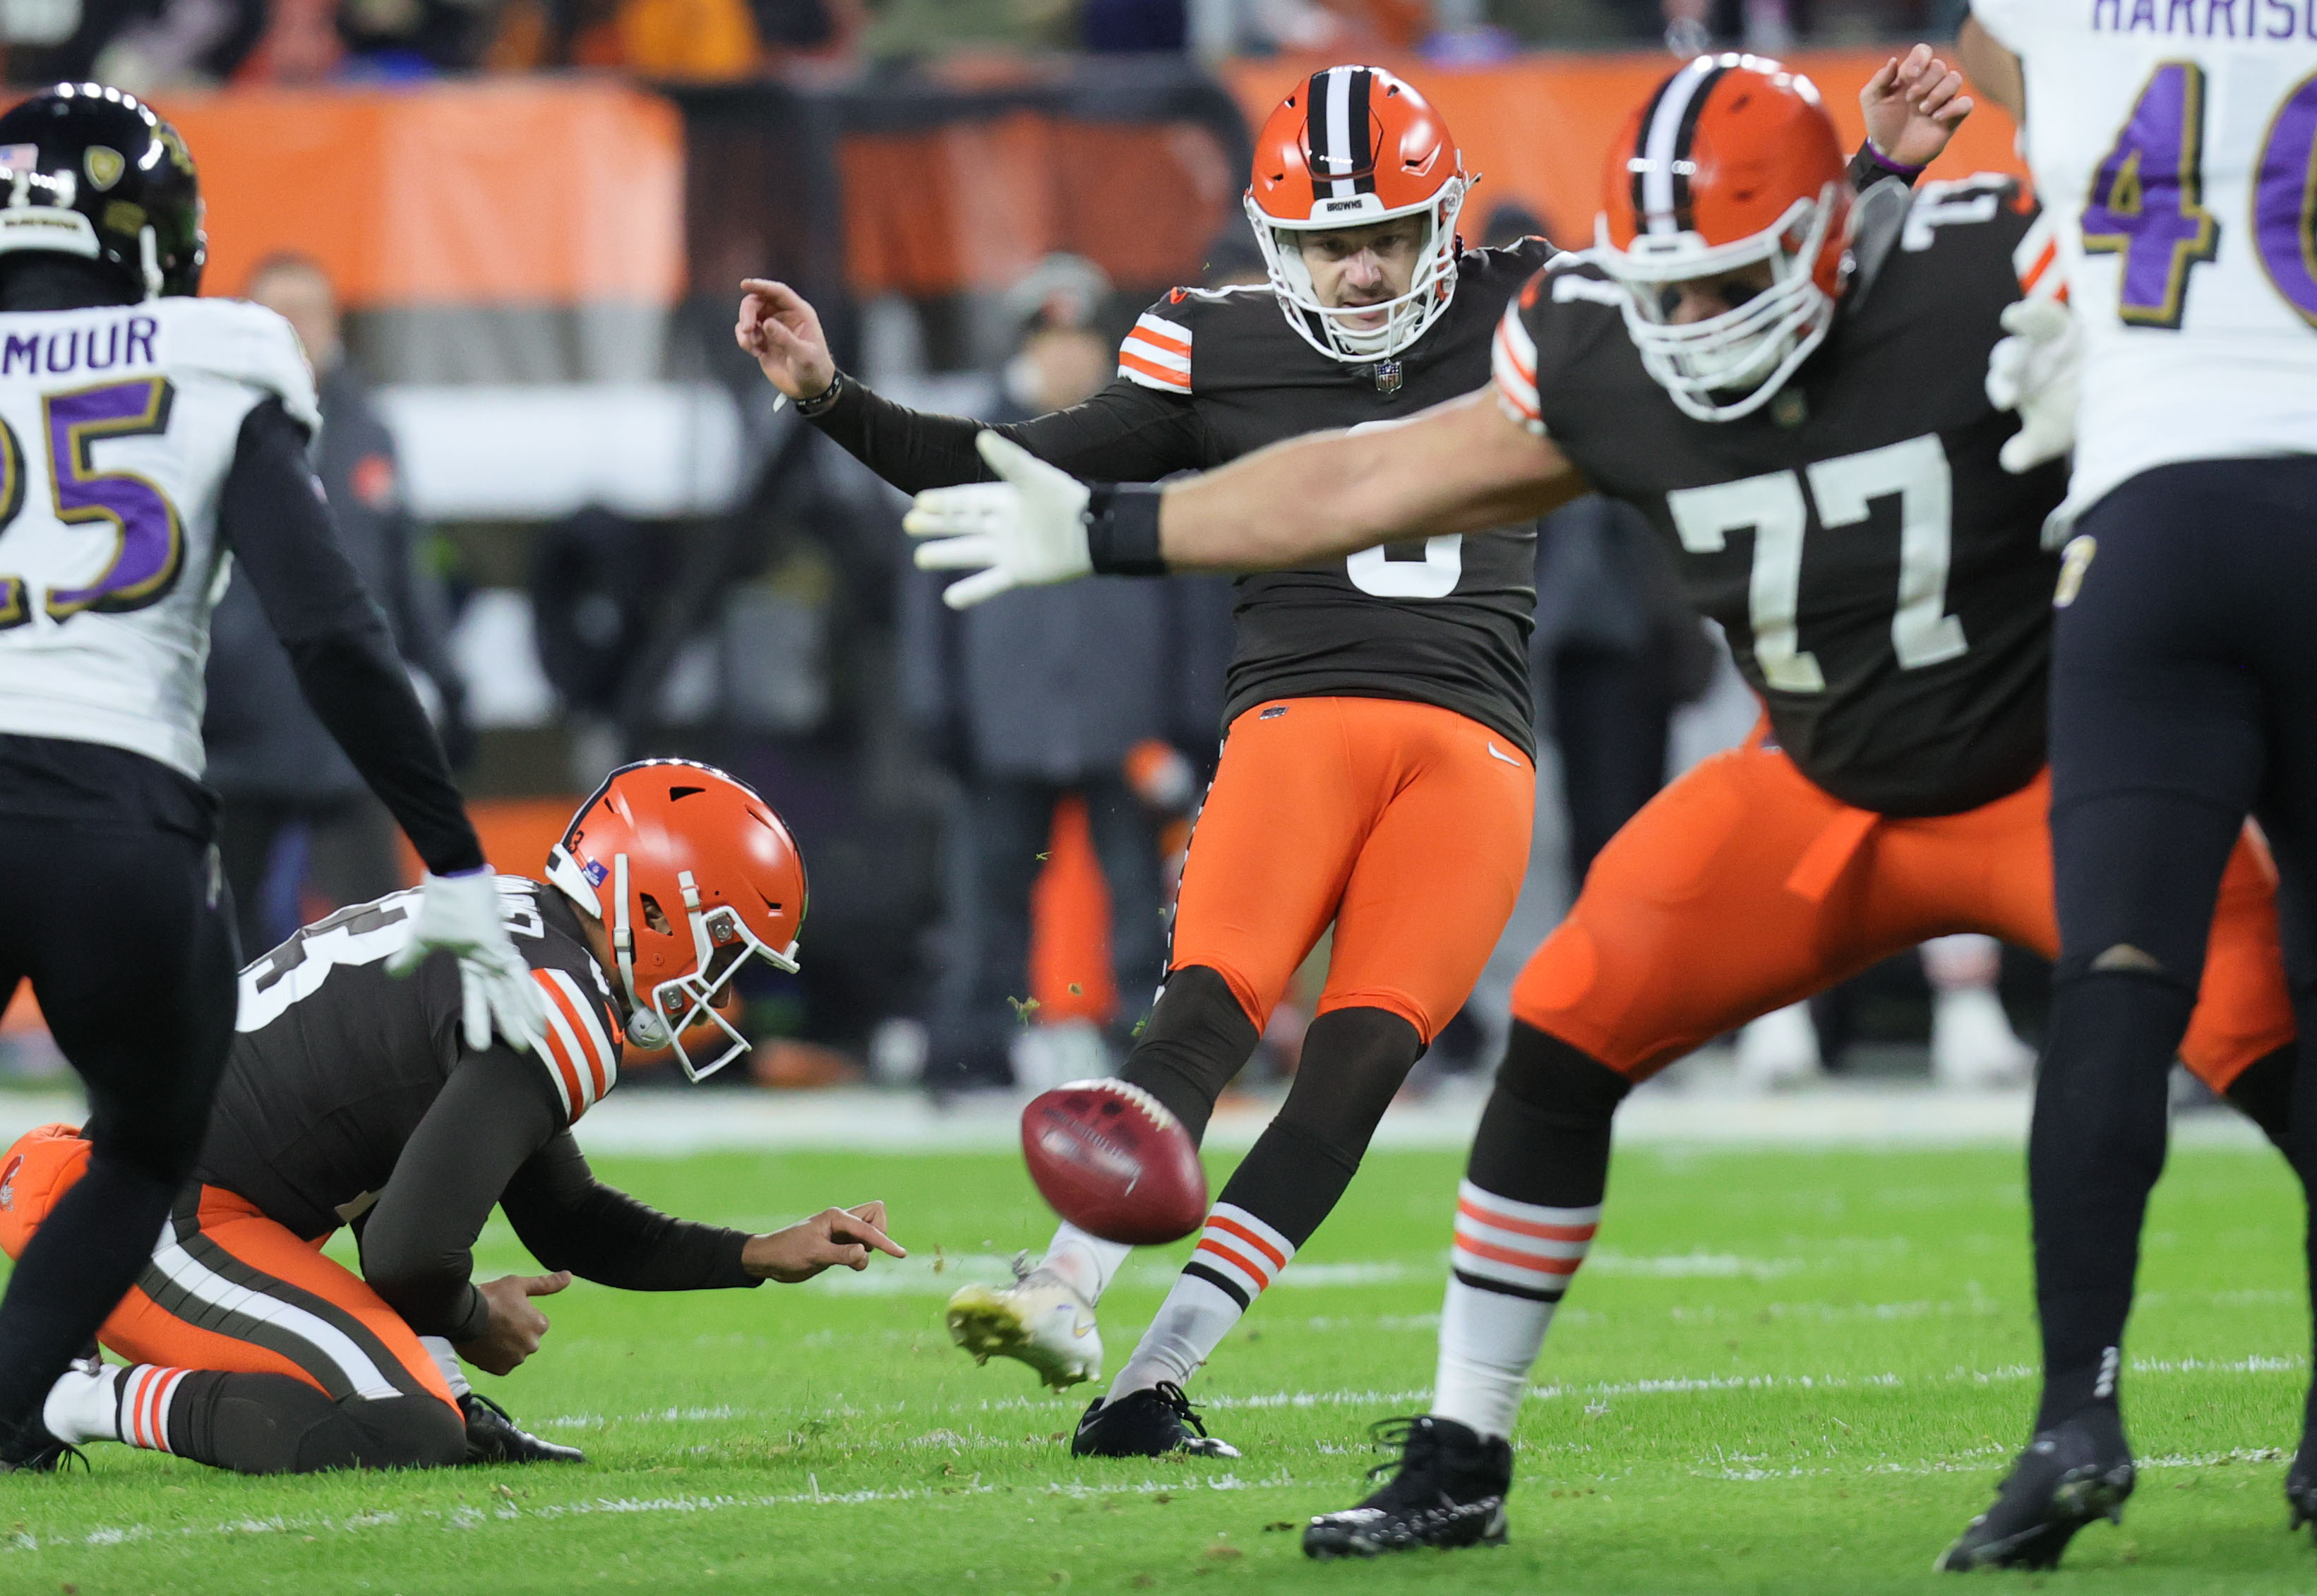 Watson throws TD, wins home debut as Browns defeat Ravens 13-3